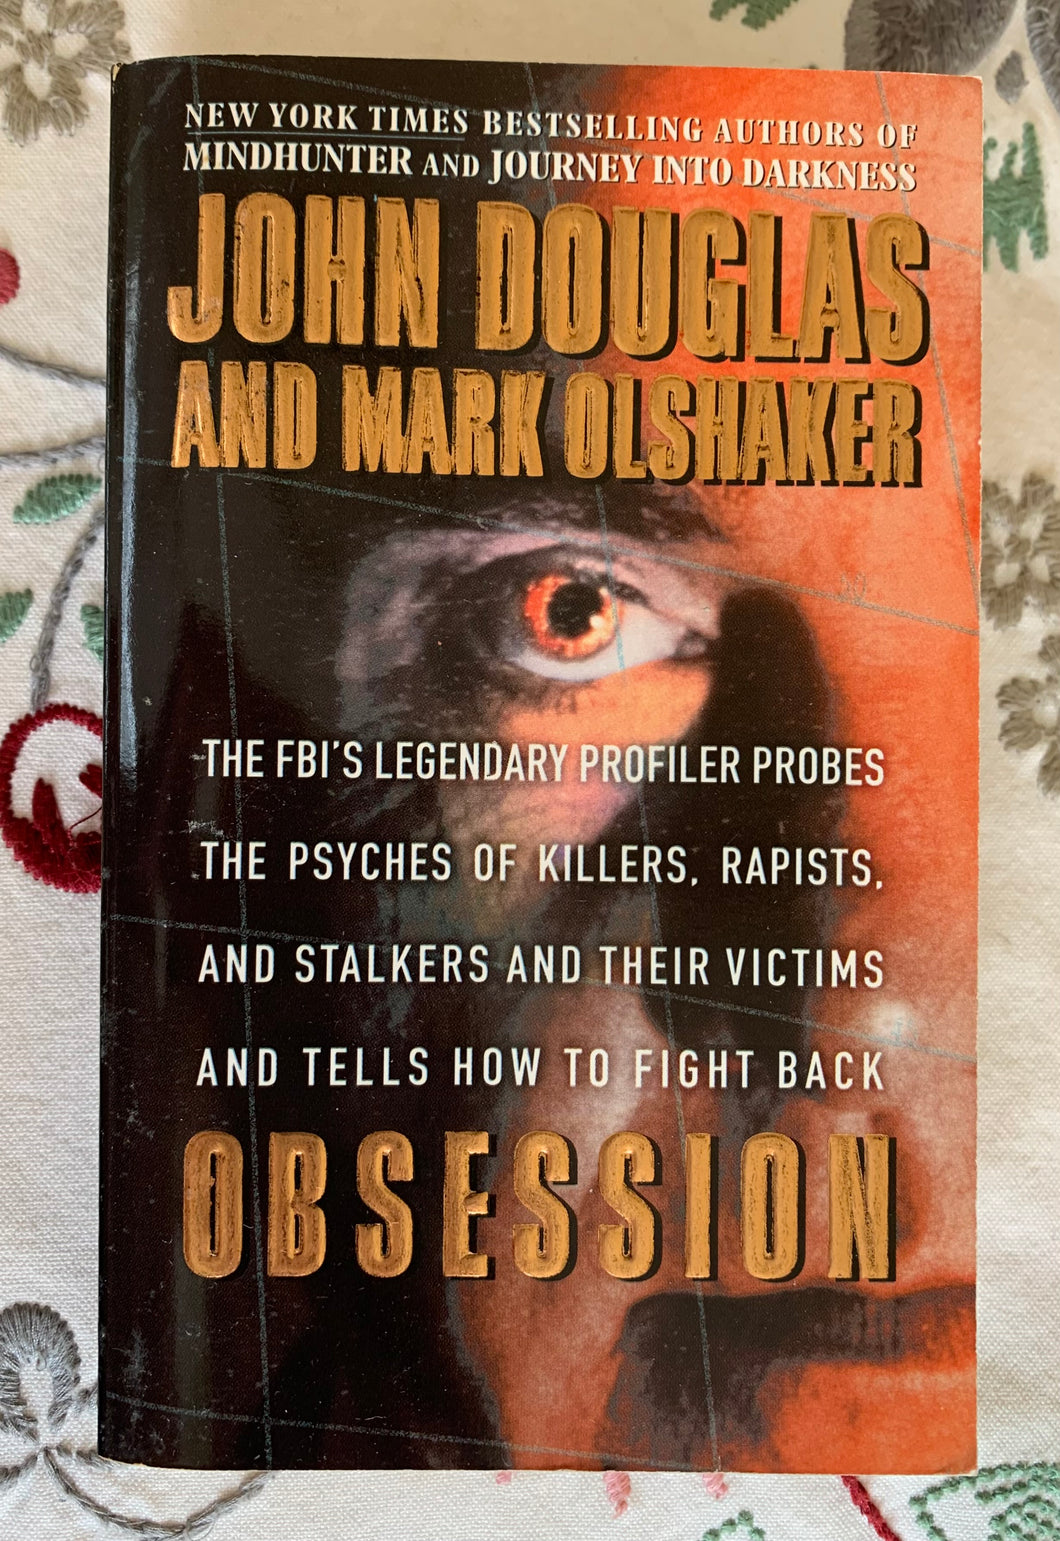 Obsession: The FBI's Legendary Profiler Probes the Psyches of Killers, Rapists, and Stalkers and Their Victims and Tells How to Fight Back